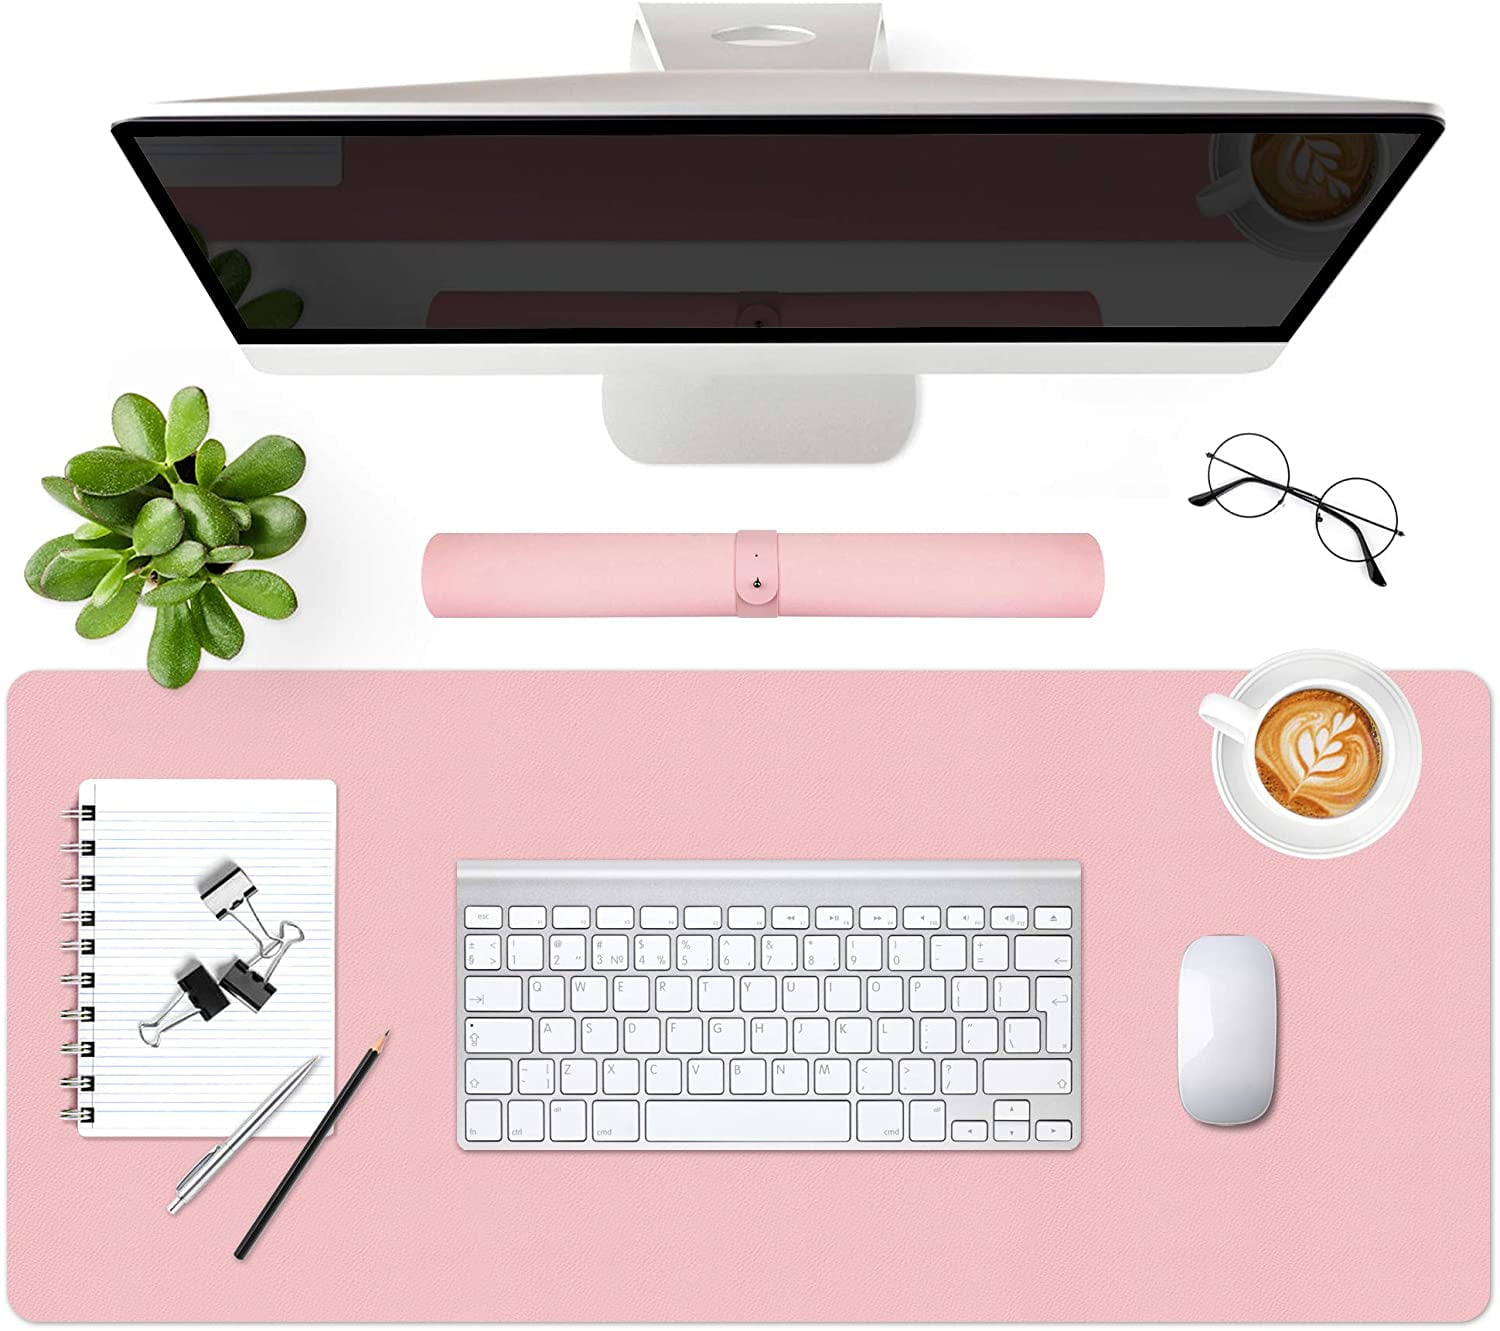 35 1/2 x15 3/8 in XXL Leather Mousepad for Computer Leather Desk Mouse Pad Pink Full Desk Protector & Writing Blotter for Office Work Extra Large Mat with Non-Slip Suede Base Laptop Keyboard 